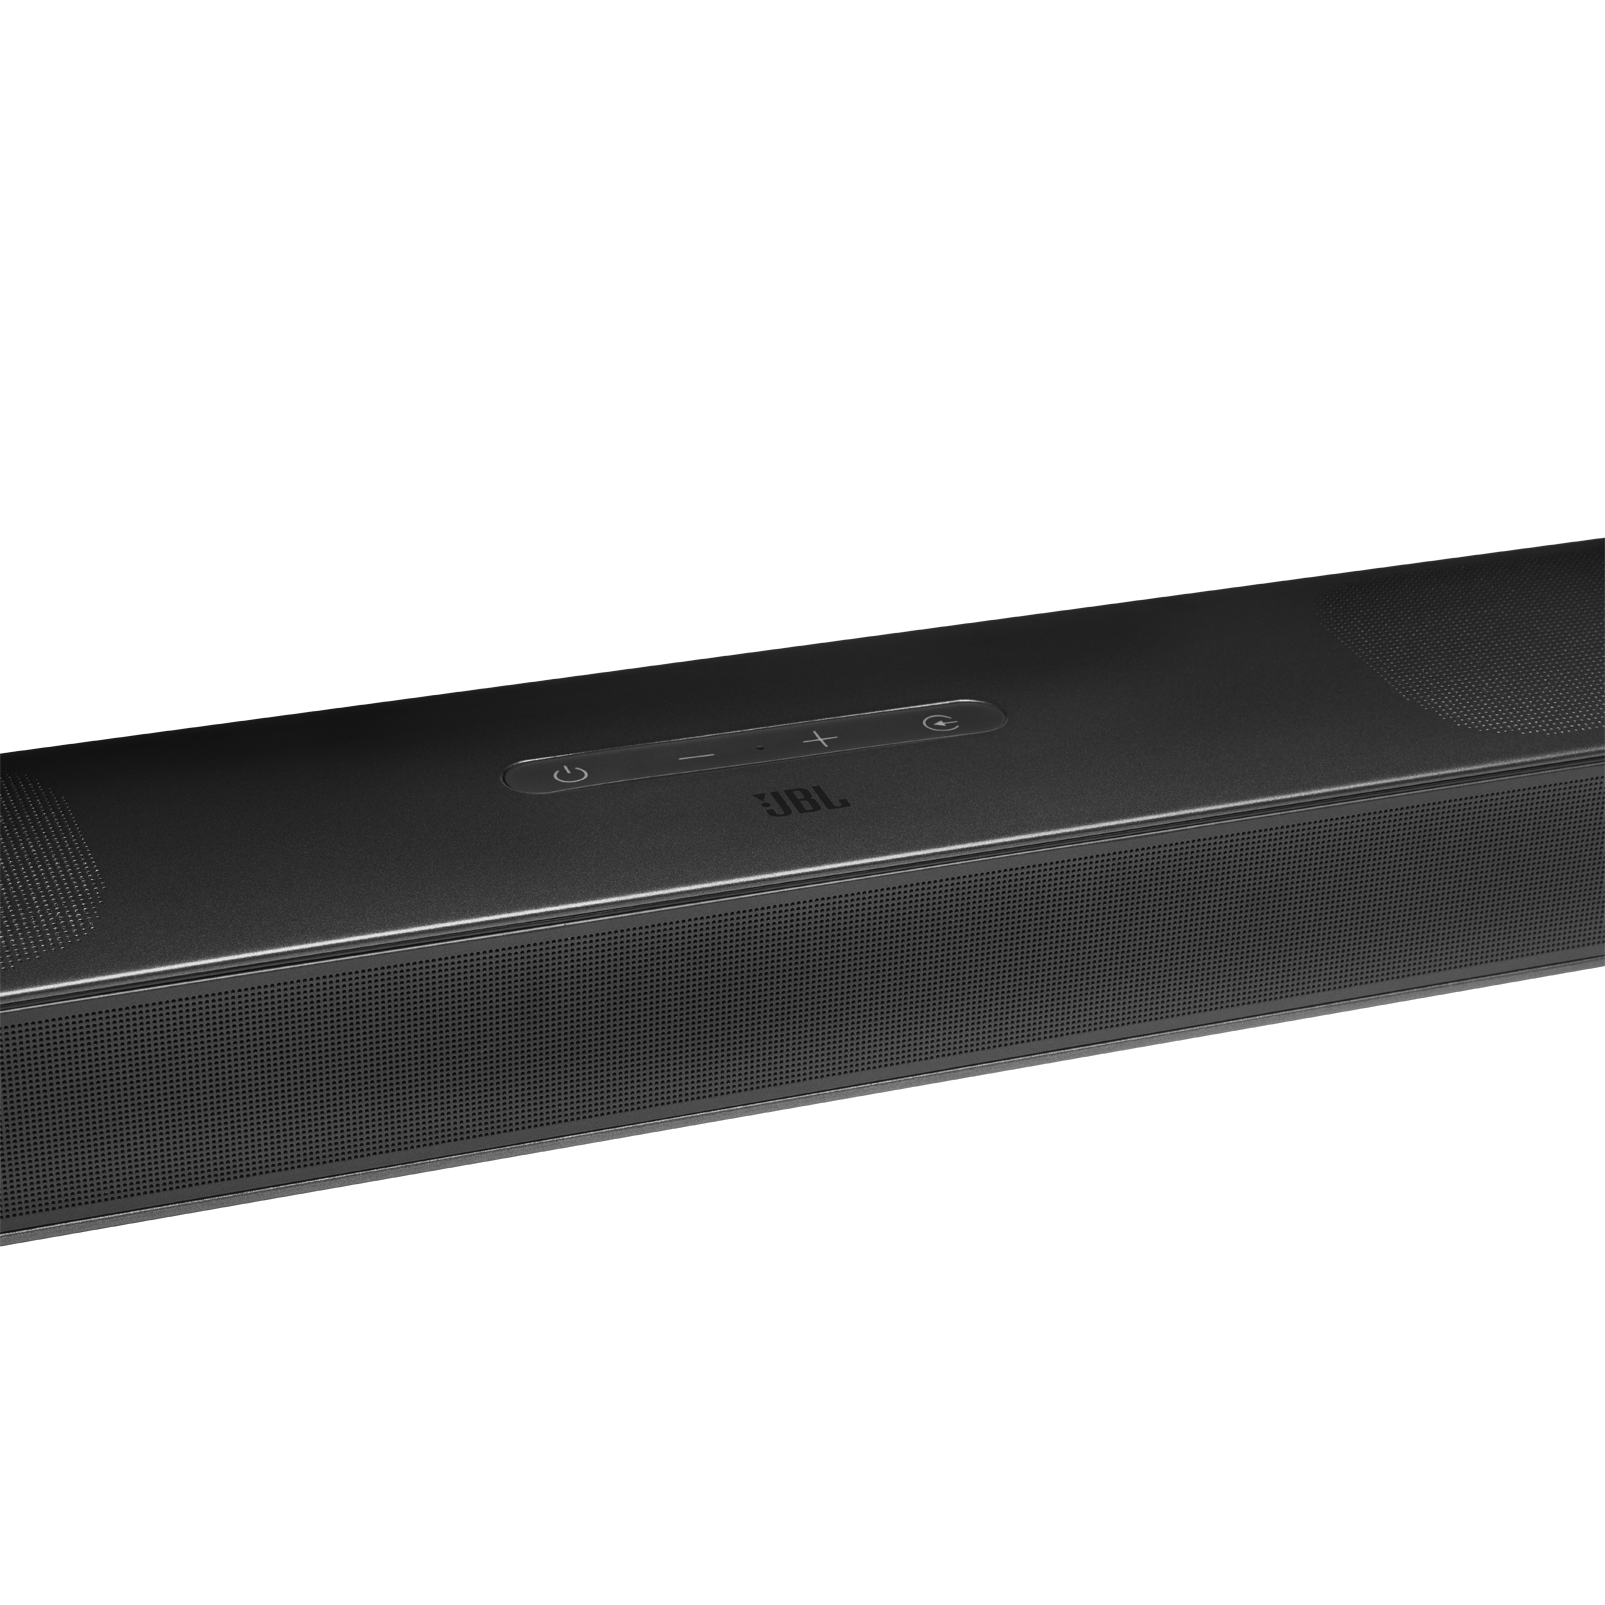 Bar 5.0 MultiBeam - Grey - 5.0 channel soundbar with MultiBeam™ technology and Virtual Dolby Atmos® - Detailshot 1